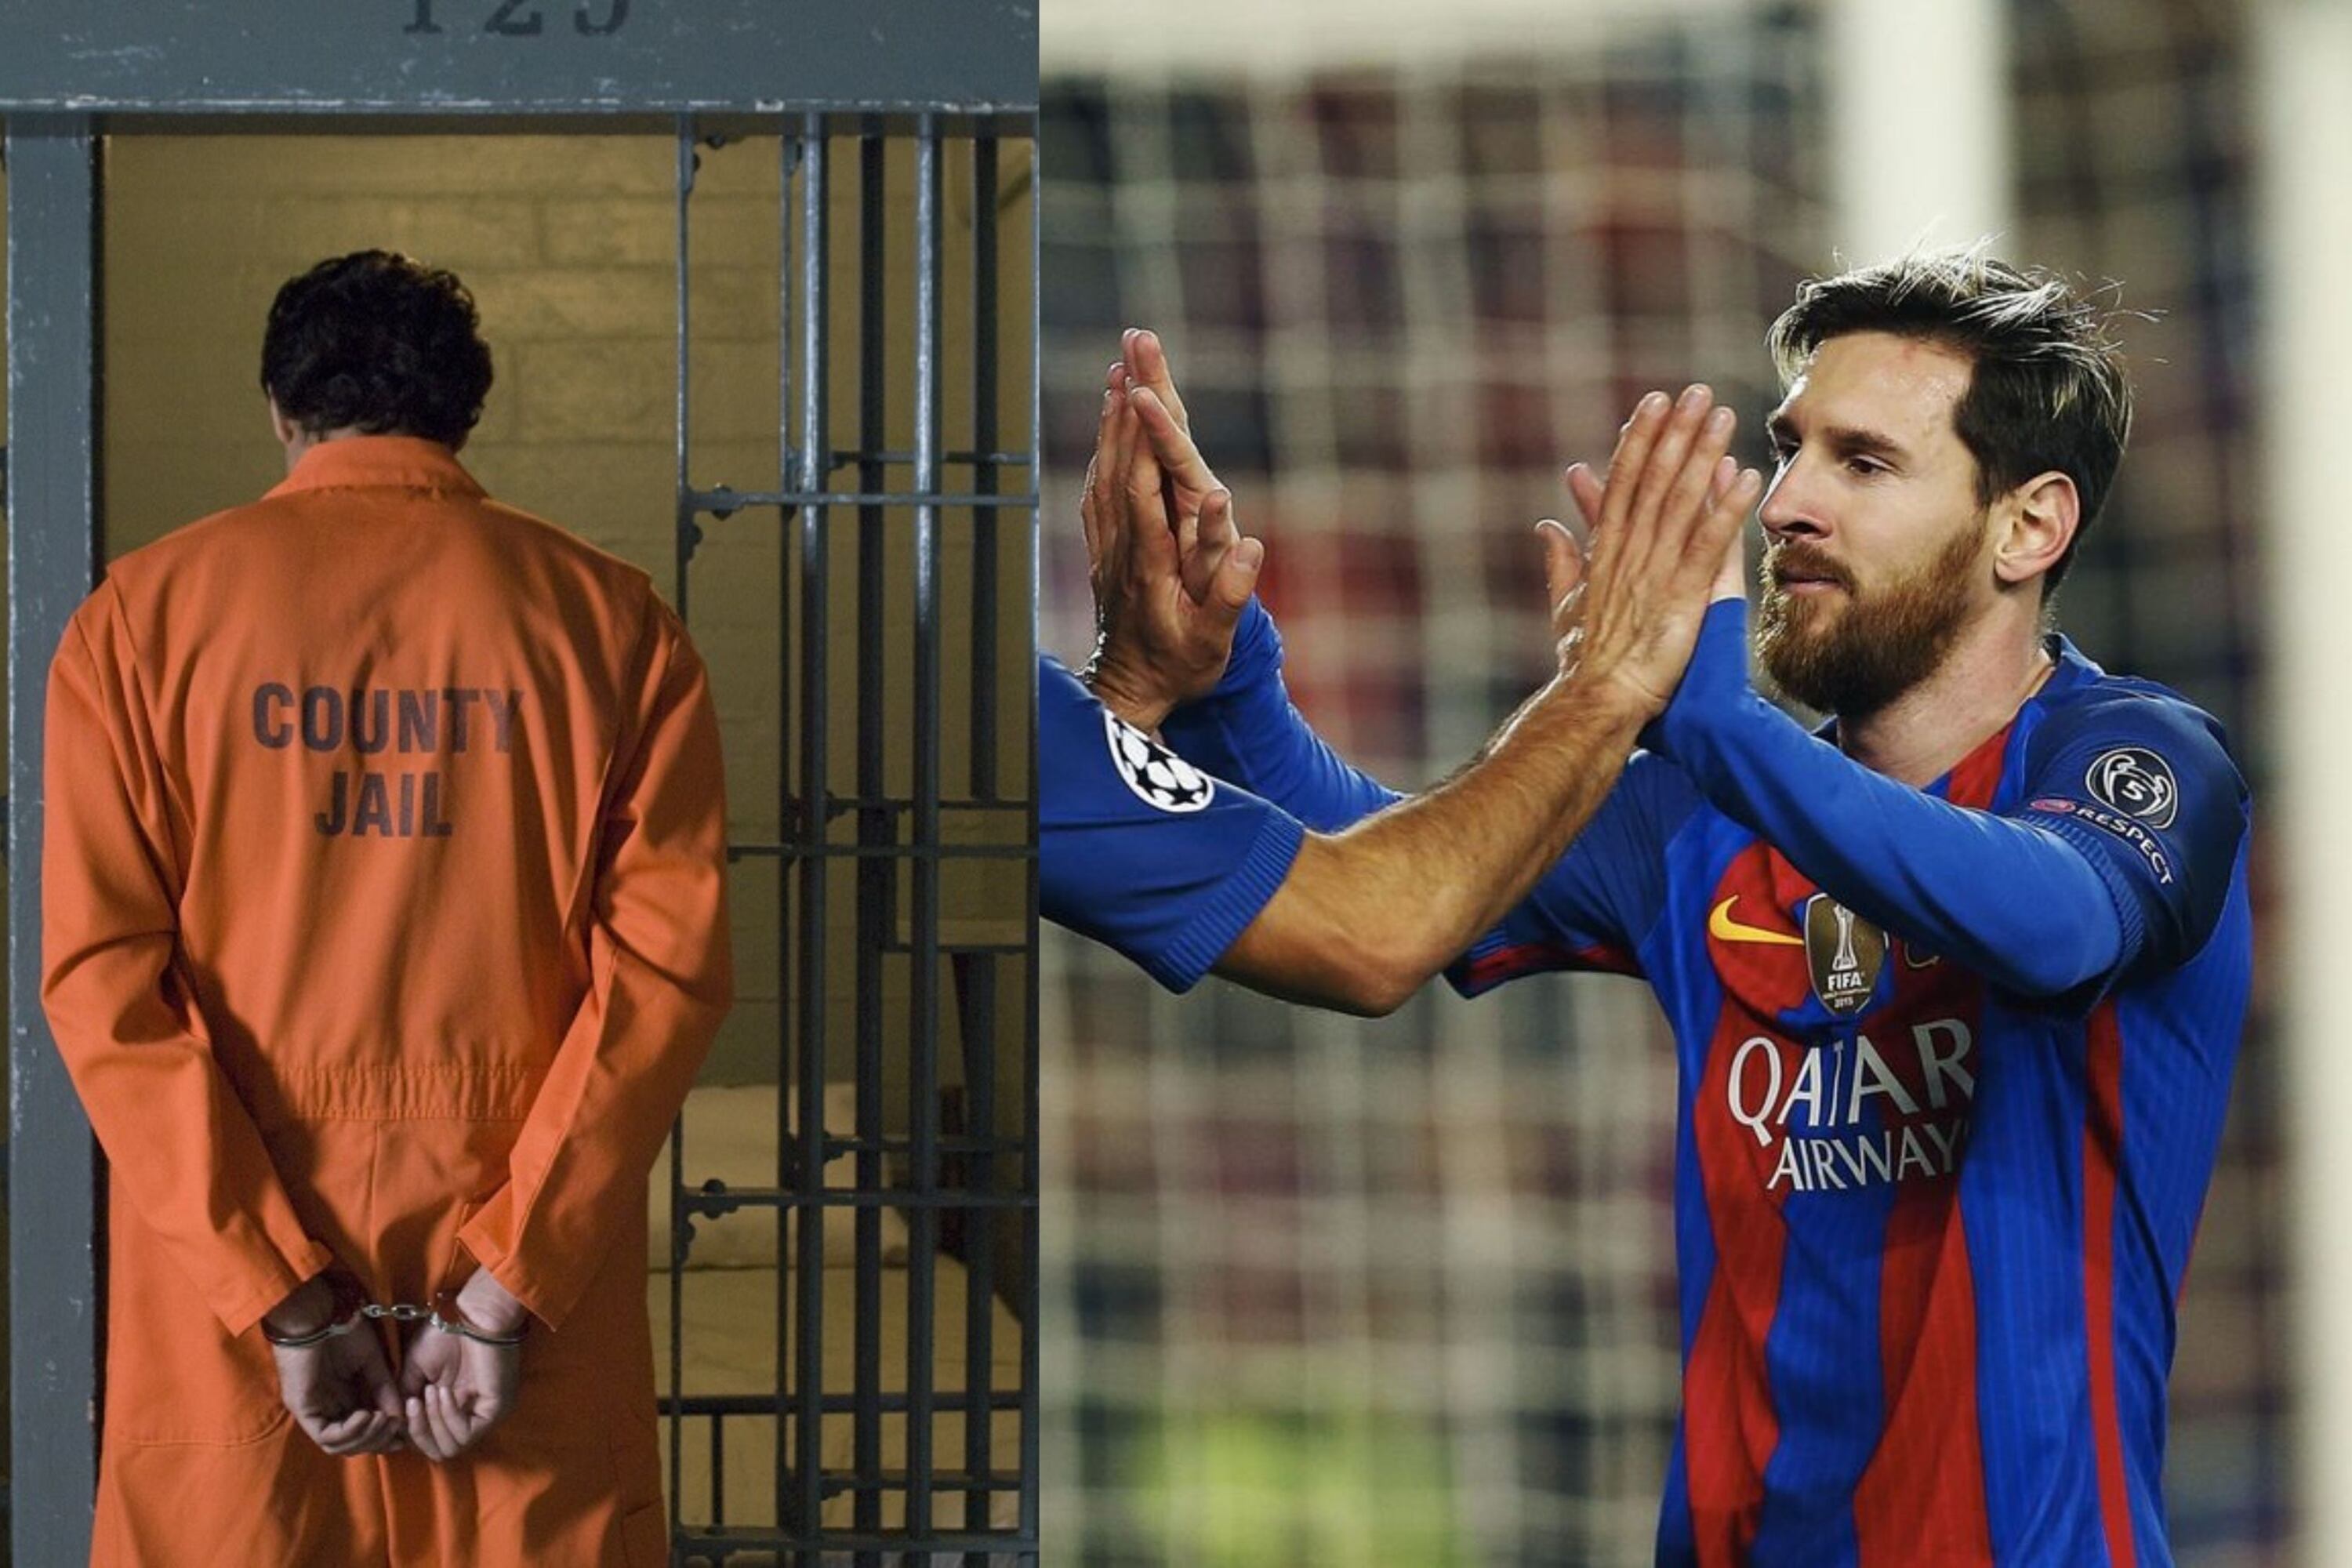 A great friend of Messi's at Barcelona, almost went to prison and now announces his retirement